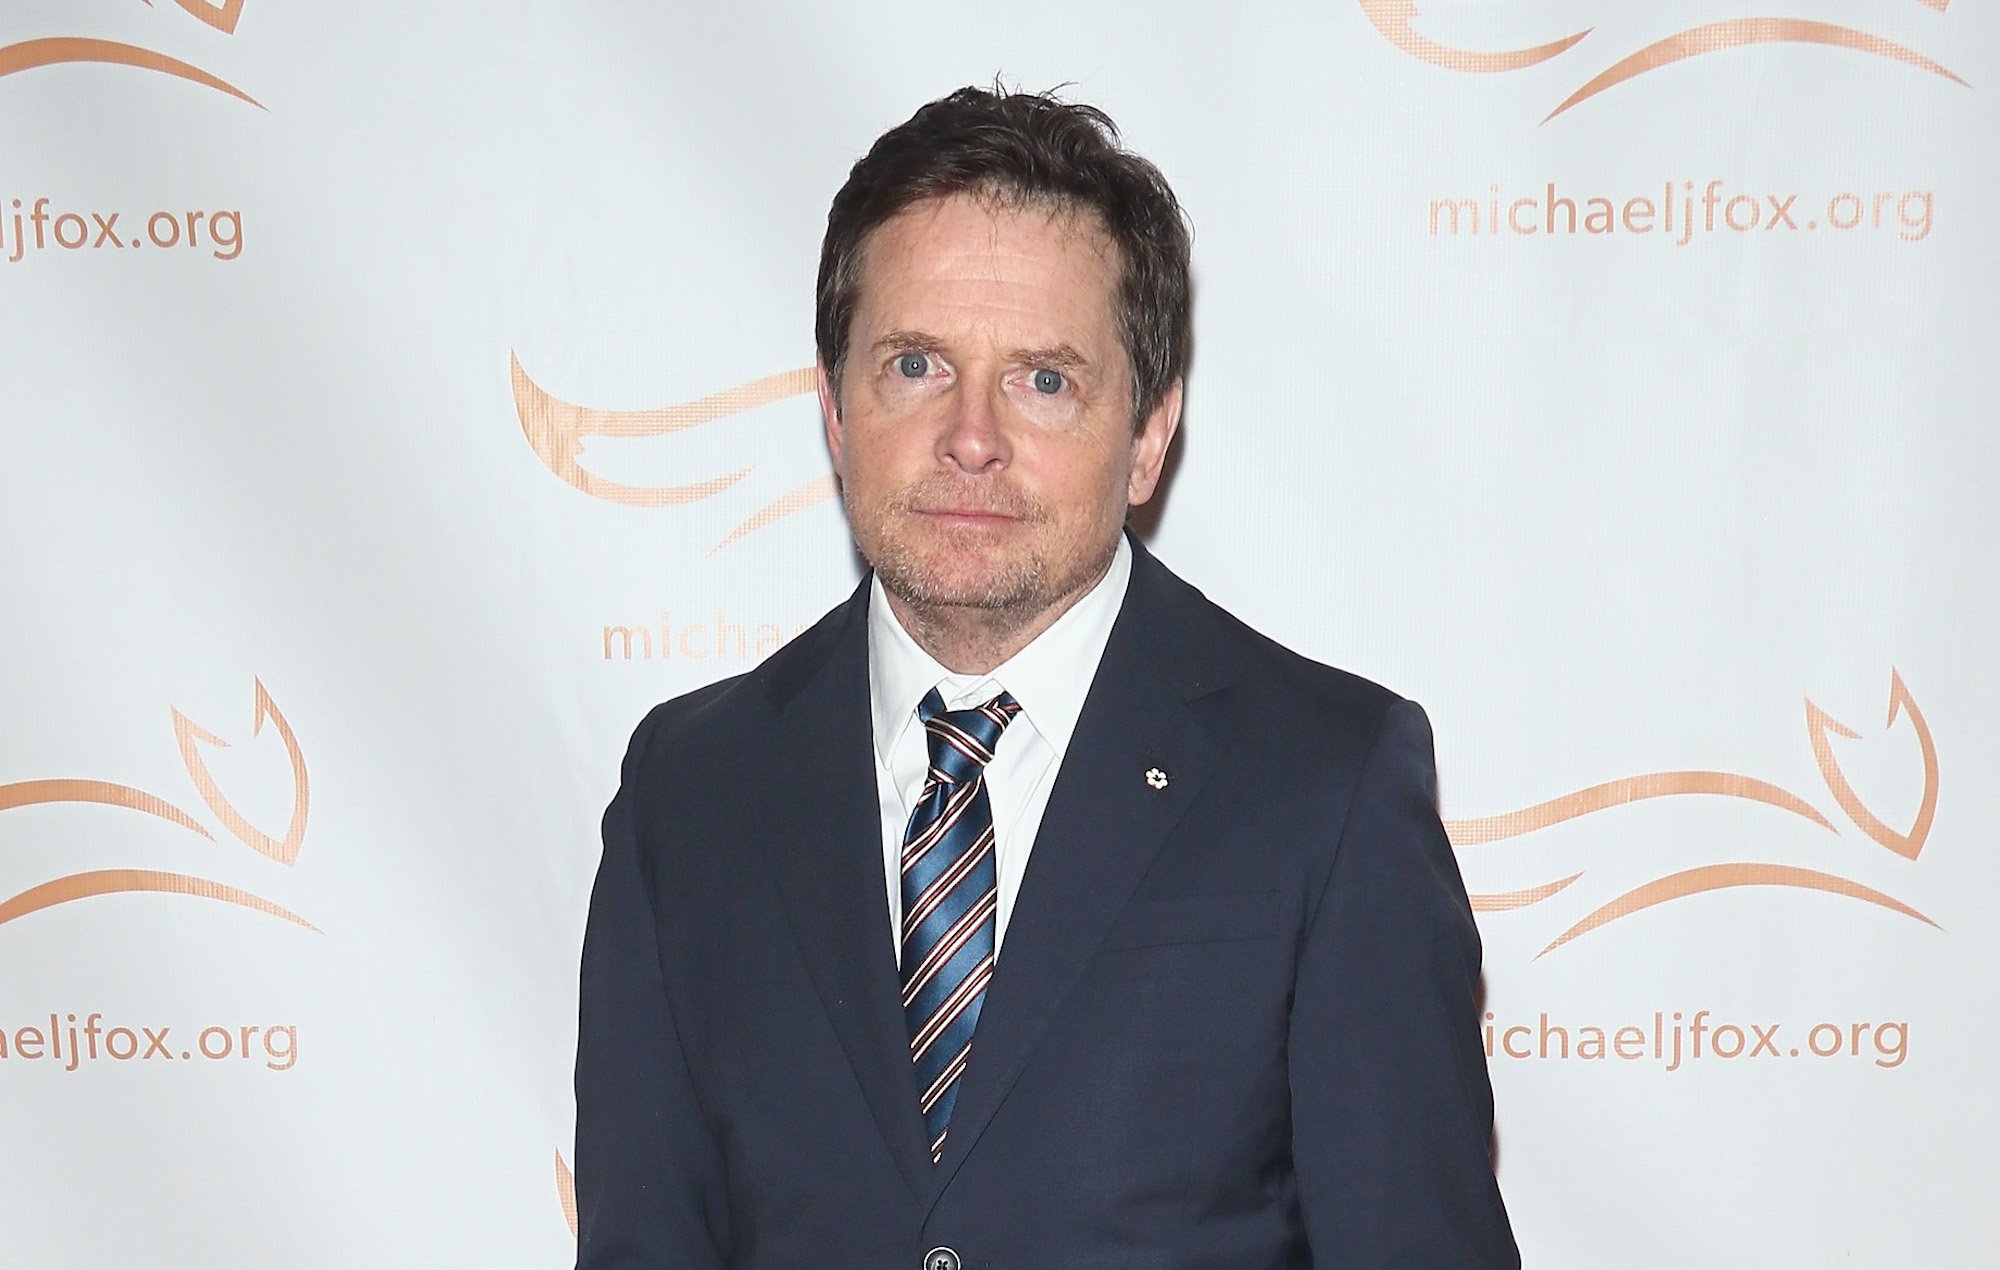 Michael J. Fox on living with Parkinson’s: “Finding ...